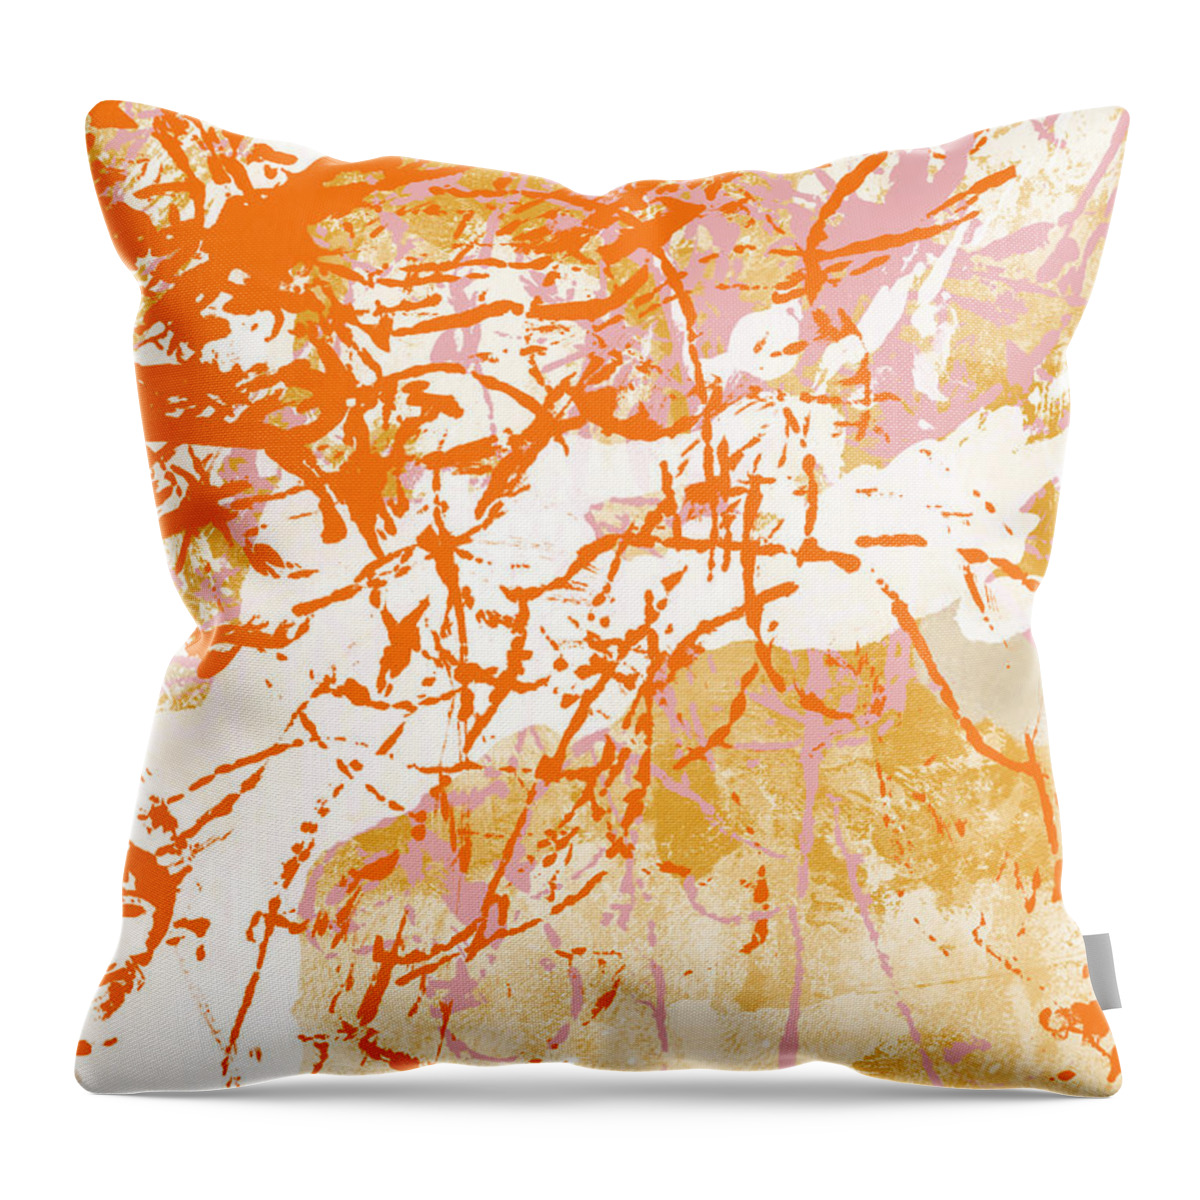 Abstract Throw Pillow featuring the painting Sunrise 2- Abstract Art by Linda Woods by Linda Woods